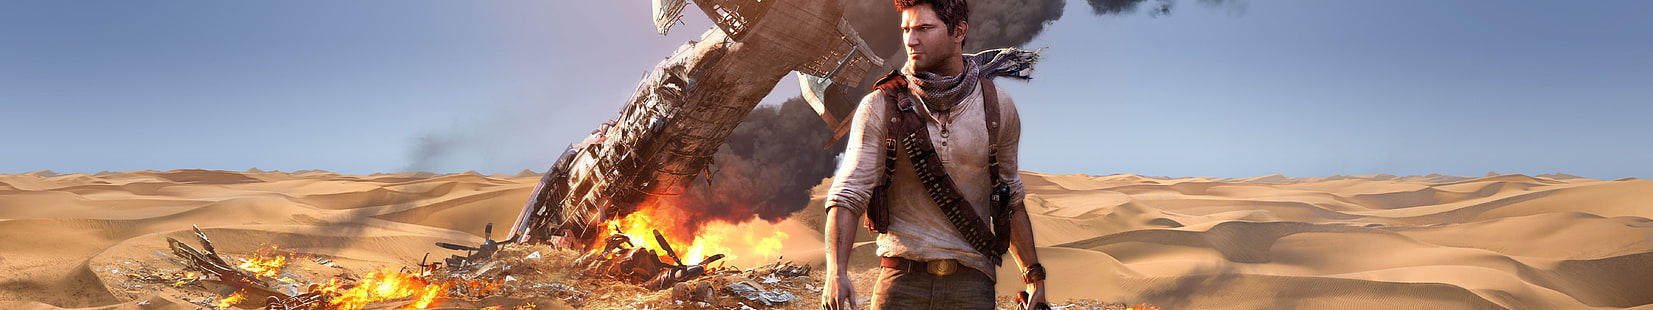 7680x1440 px uncharted Uncharted 3: DrakesDeception Entertainment Engraçado HD Art, Uncharted, 7680x1440 px, Uncharted 3: DrakesDe, HD papel de parede HD wallpaper